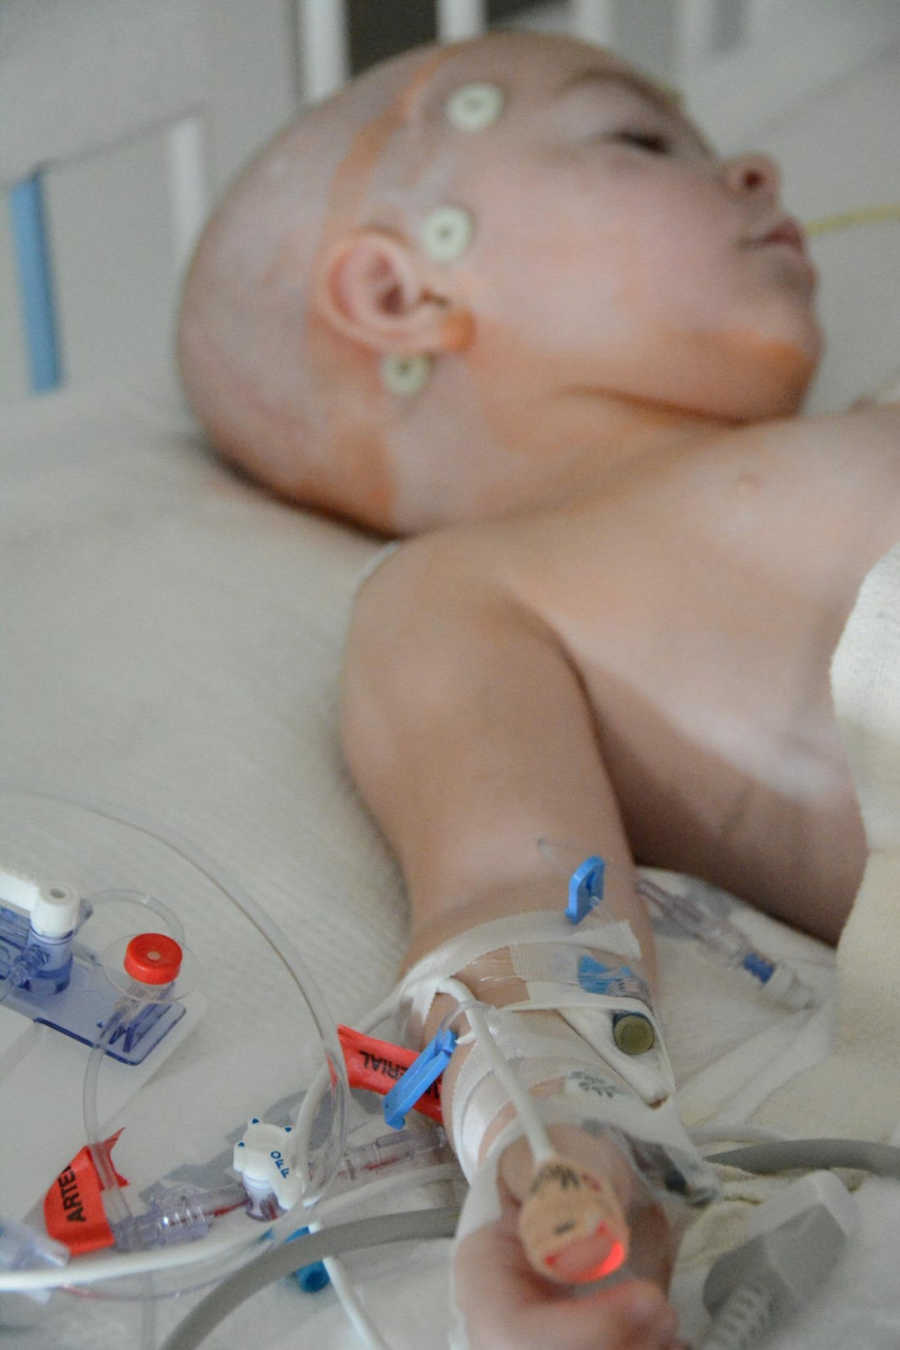 Baby who needs brain surgery lays in hospital bed hooked up to monitors